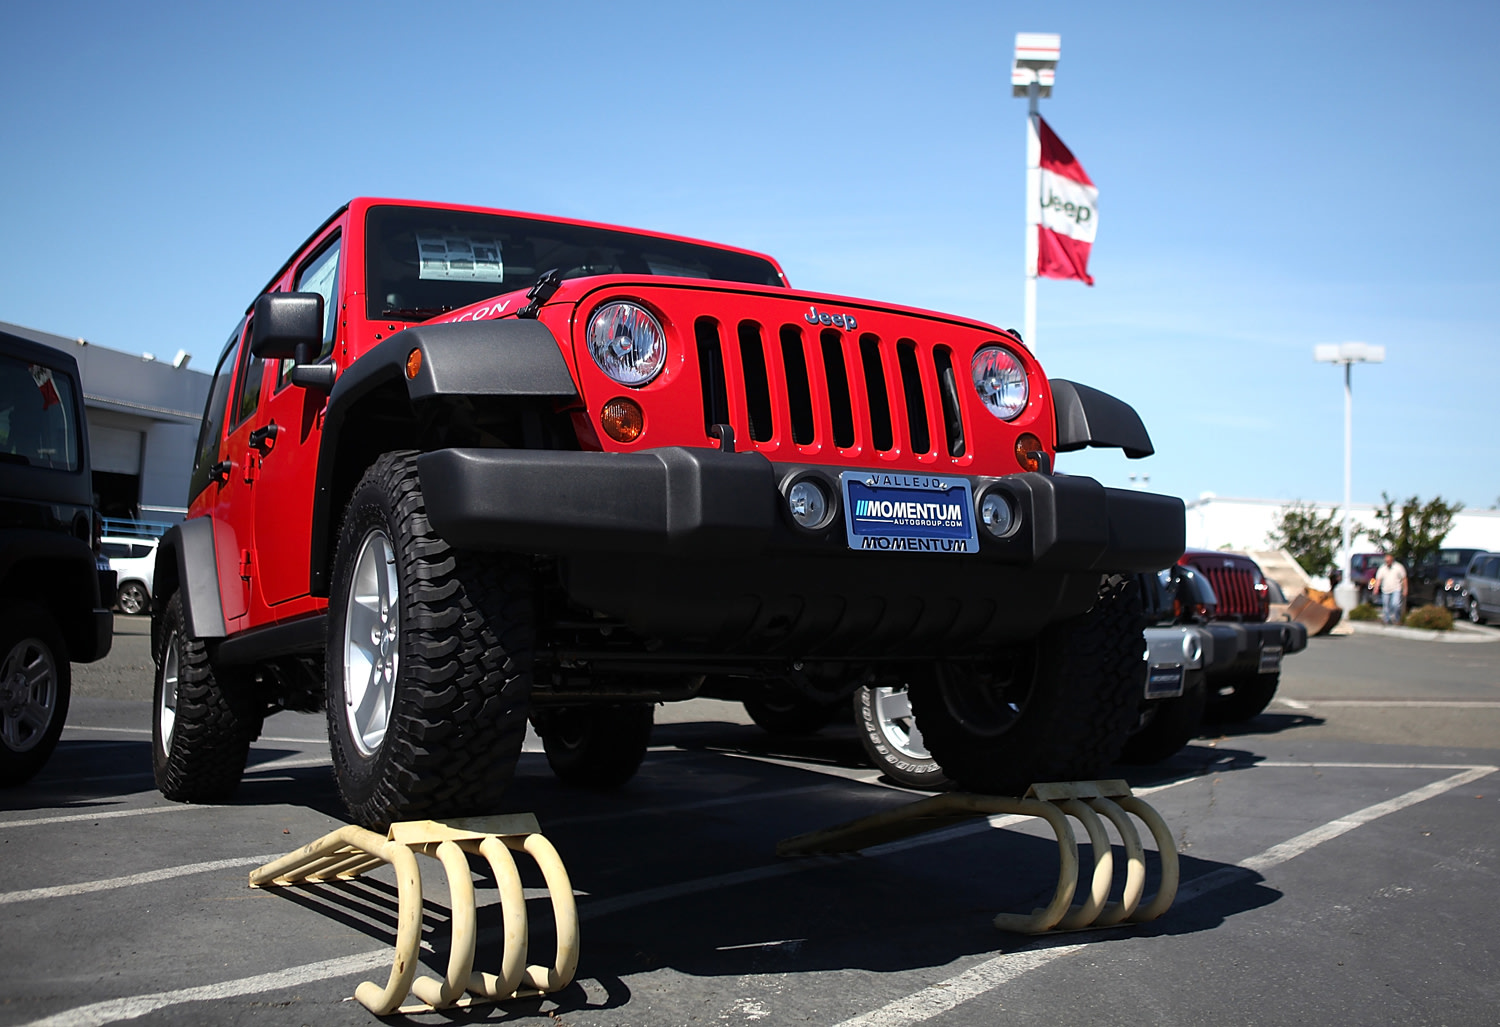 A more fuel-efficient Wrangler in the works, Jeep says